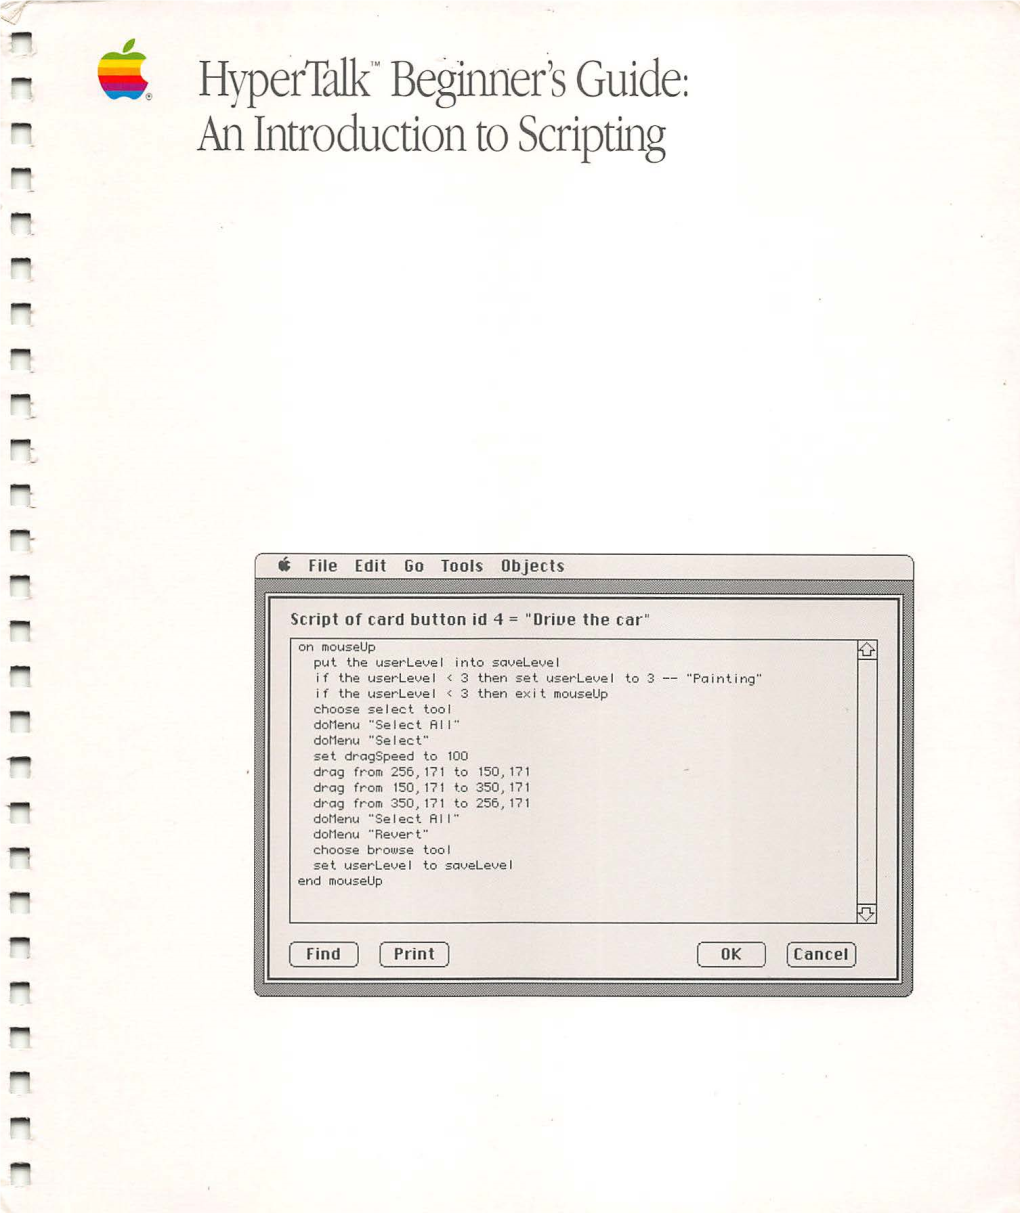 Hypertalk Beginners Guide an Introduction to Scripting 1989.Pdf